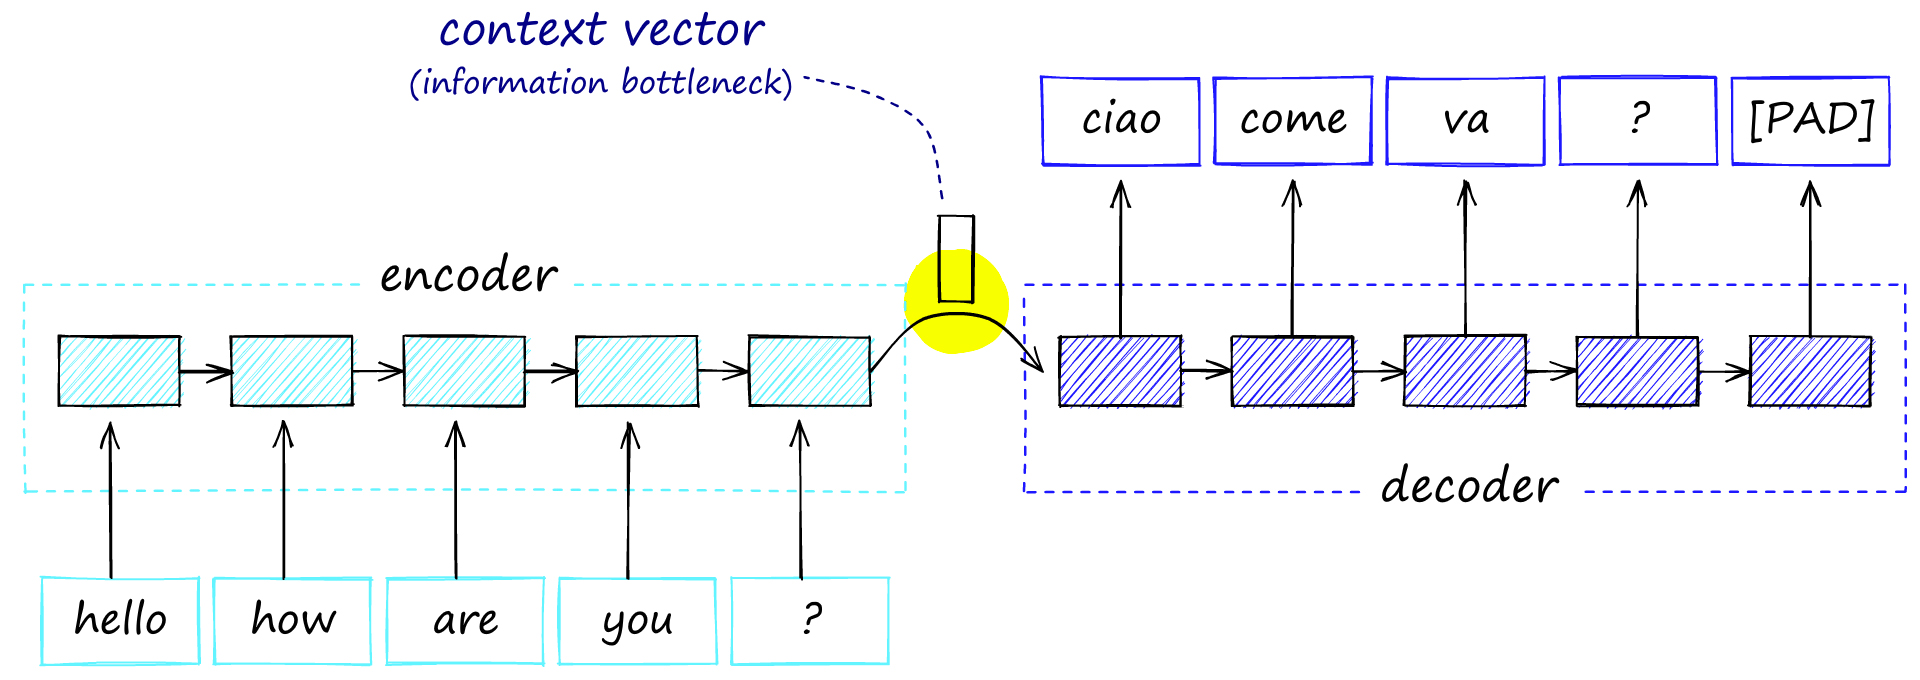 Encoder-decoder architecture with the single context vector shared between the two models, this acts as an information bottleneck as all information must be passed through this point.